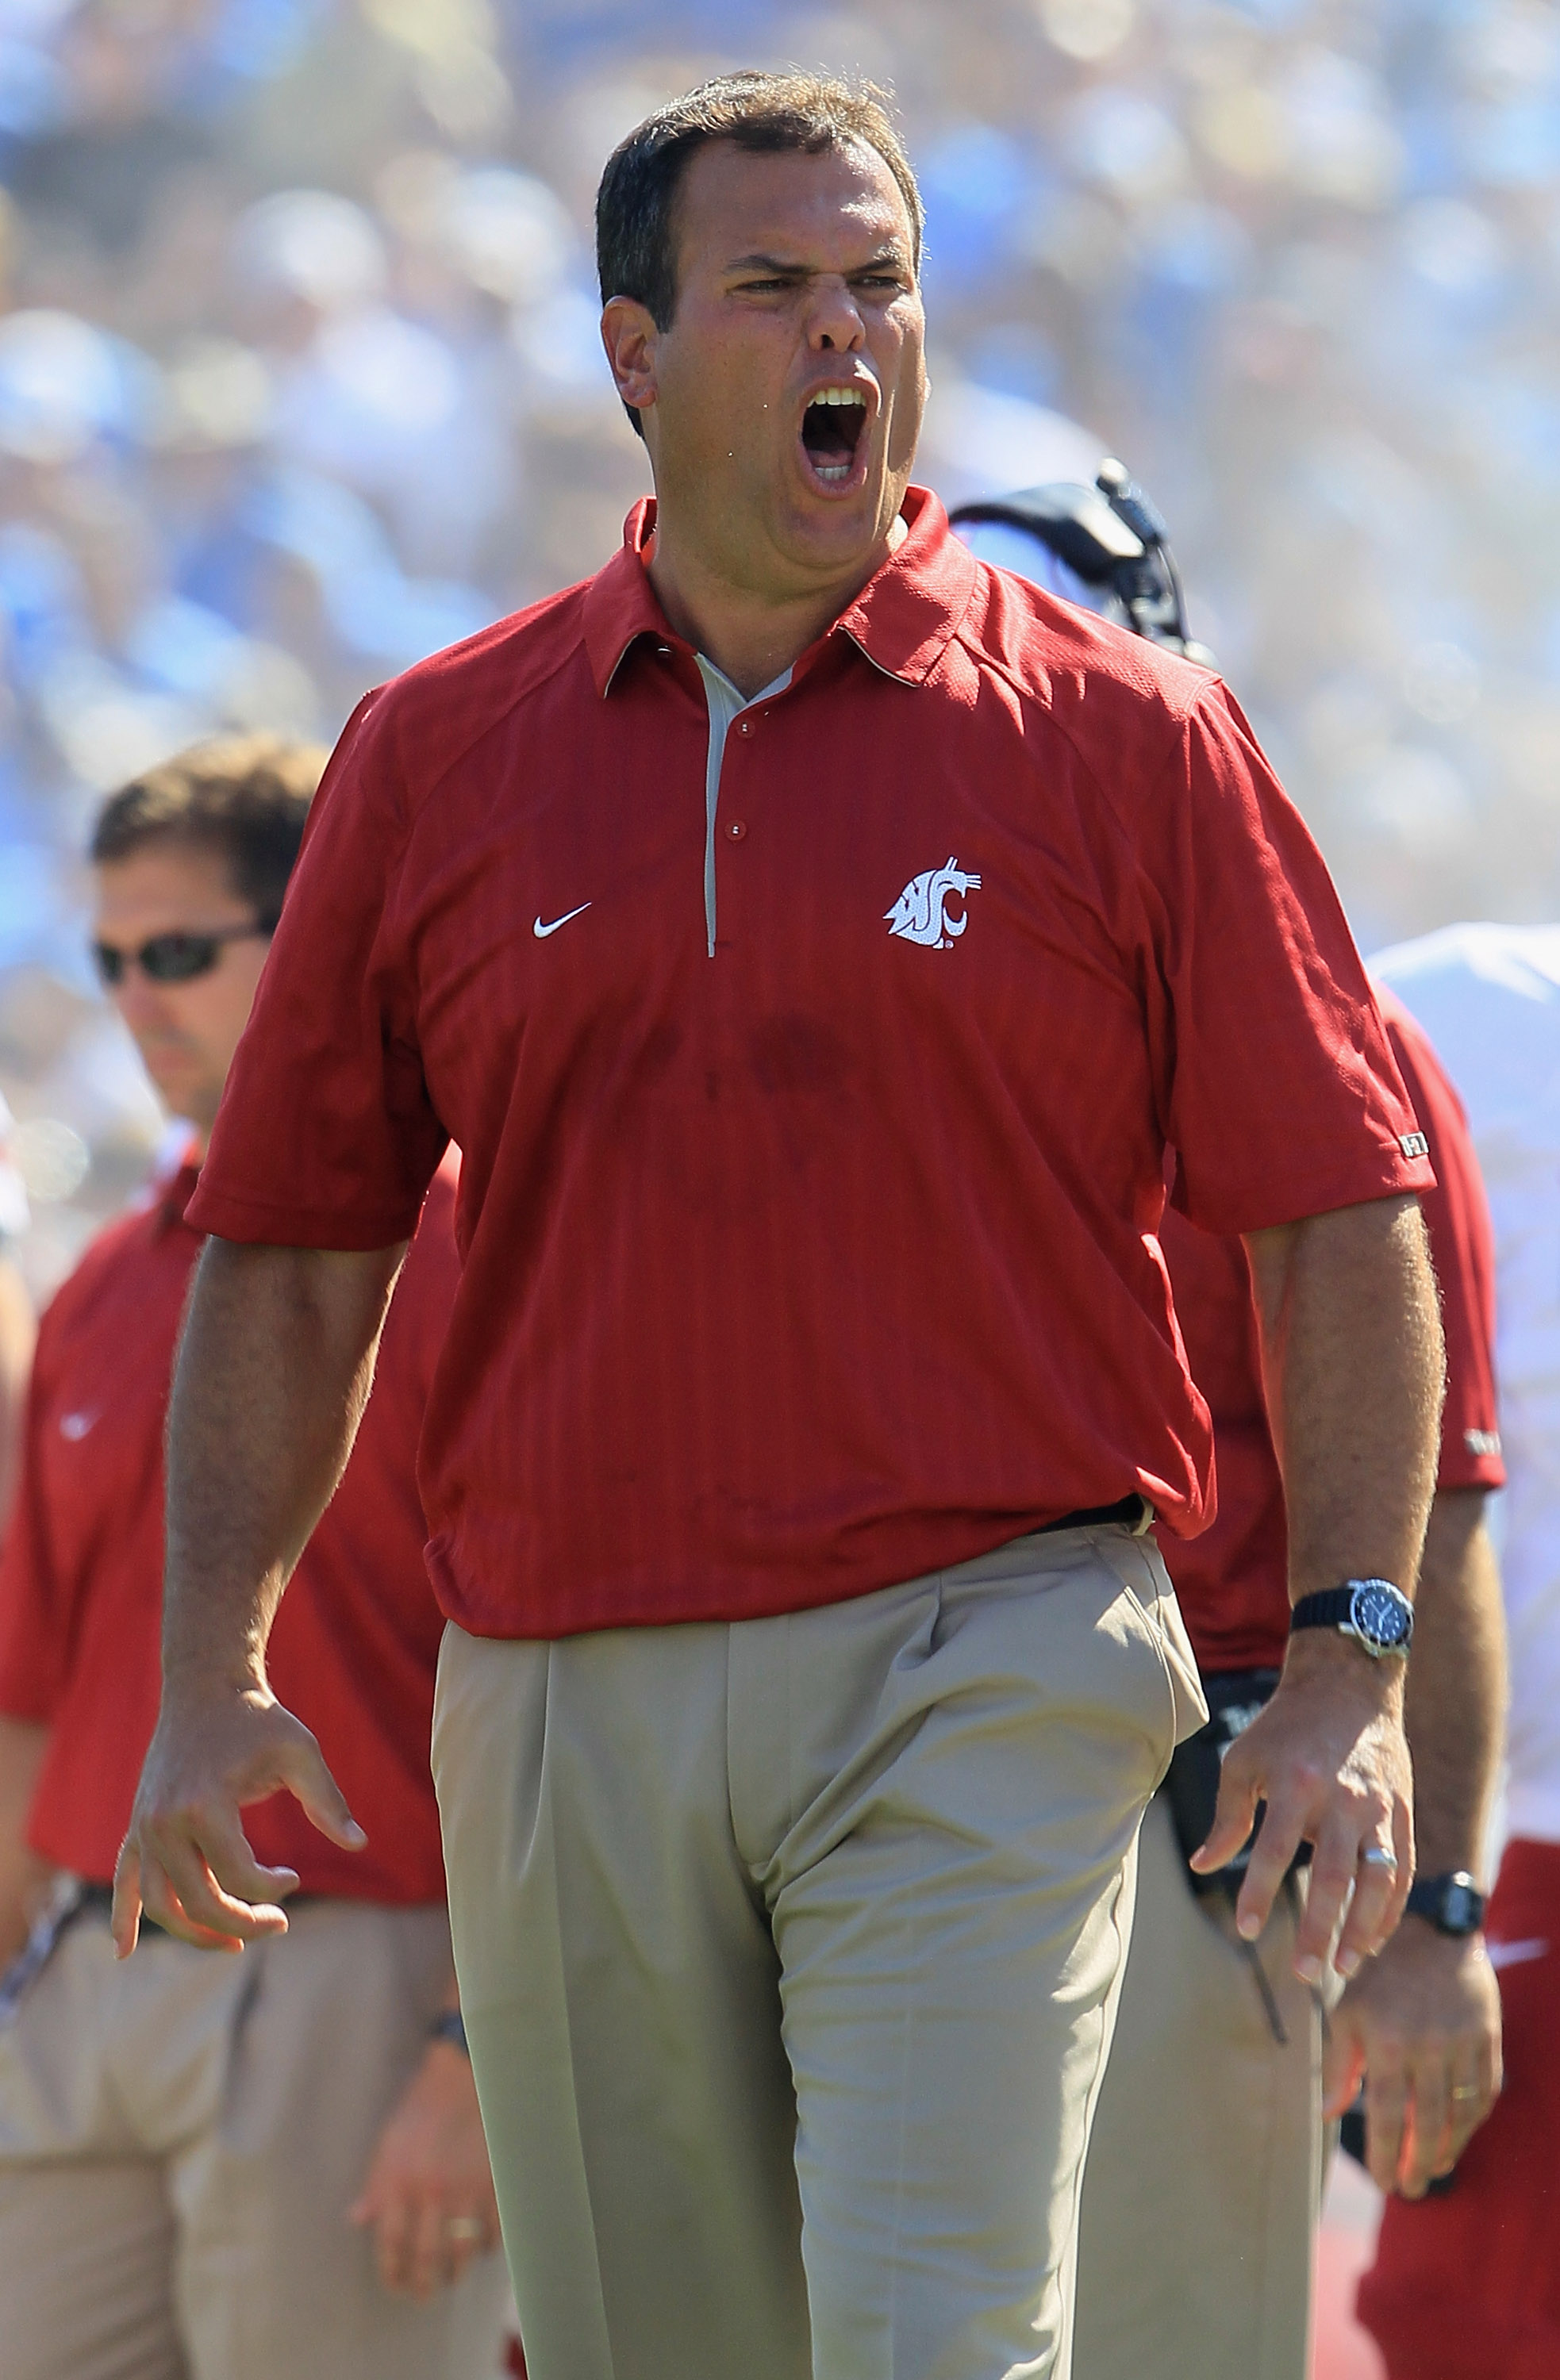 PASADENA, CA - OCTOBER 02:  Washington State Cougars head coach Paul Wulff yells from the sideline against the UCLA Bruins at the Rose Bowl on October 2, 2010 in Pasadena, California. UCLA defeated Washington State 42-28.  (Photo by Jeff Gross/Getty Image